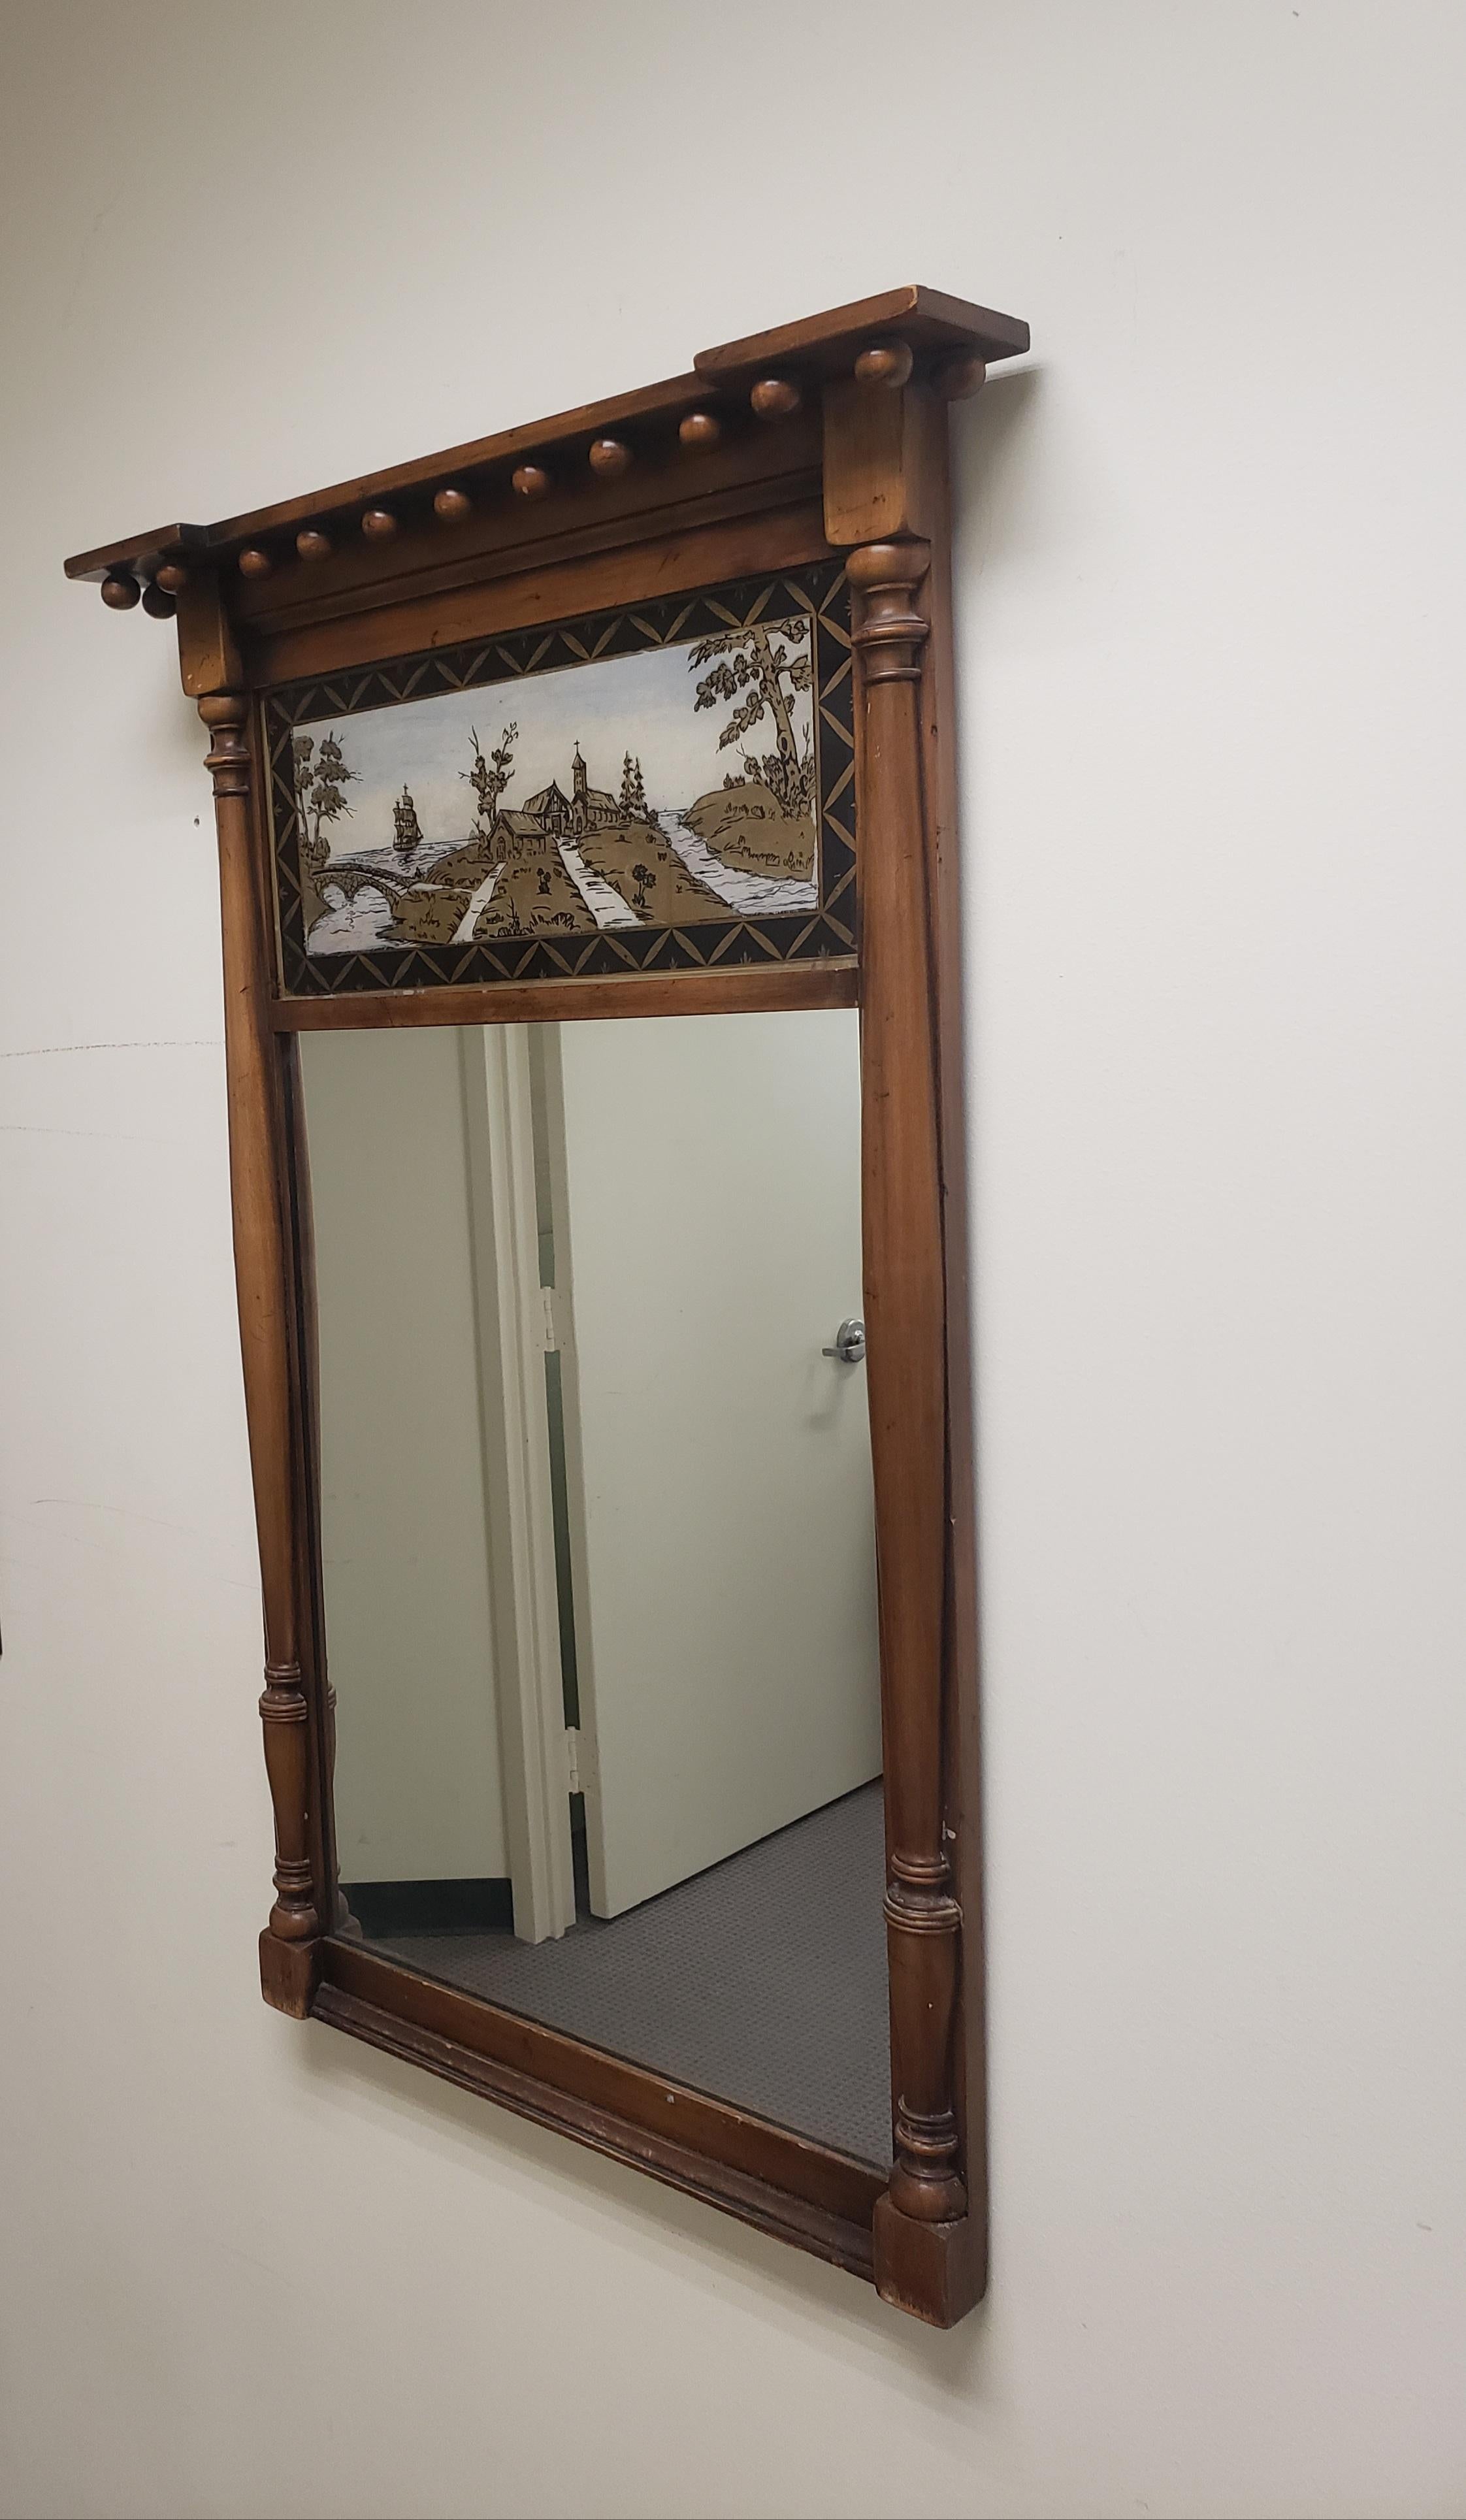 Other Early 20th Century Federal Style Mahogany And Eglomise Wall Trumeau Mirror For Sale